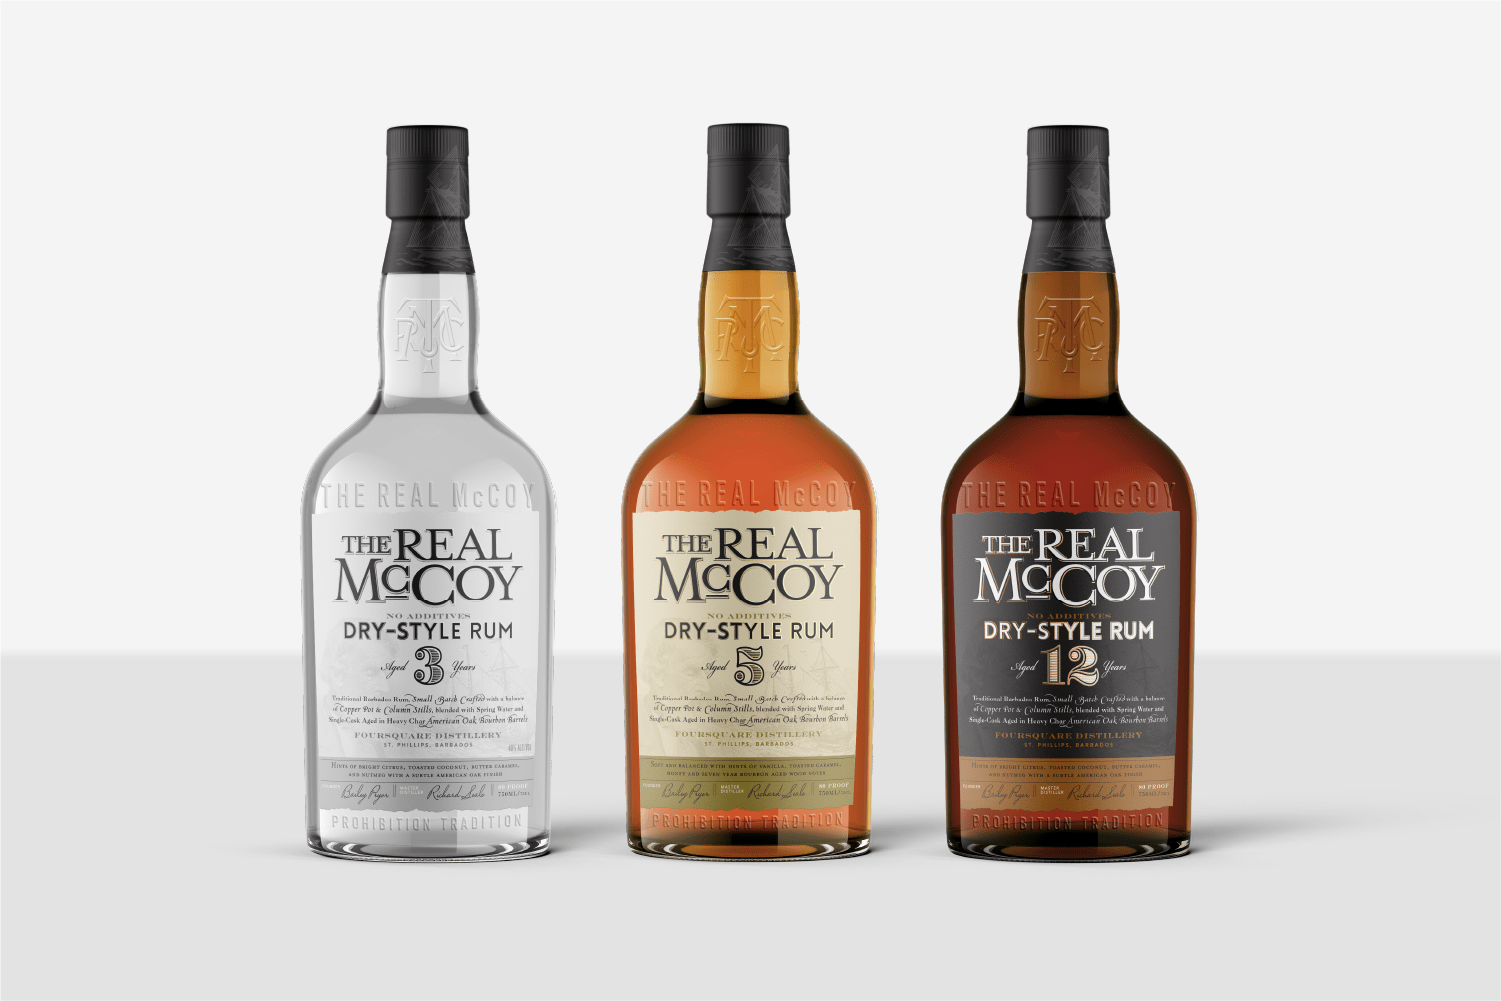 he Real McCoy bottle and label design concept for 3 year, 5 year and 12 year aged Rum